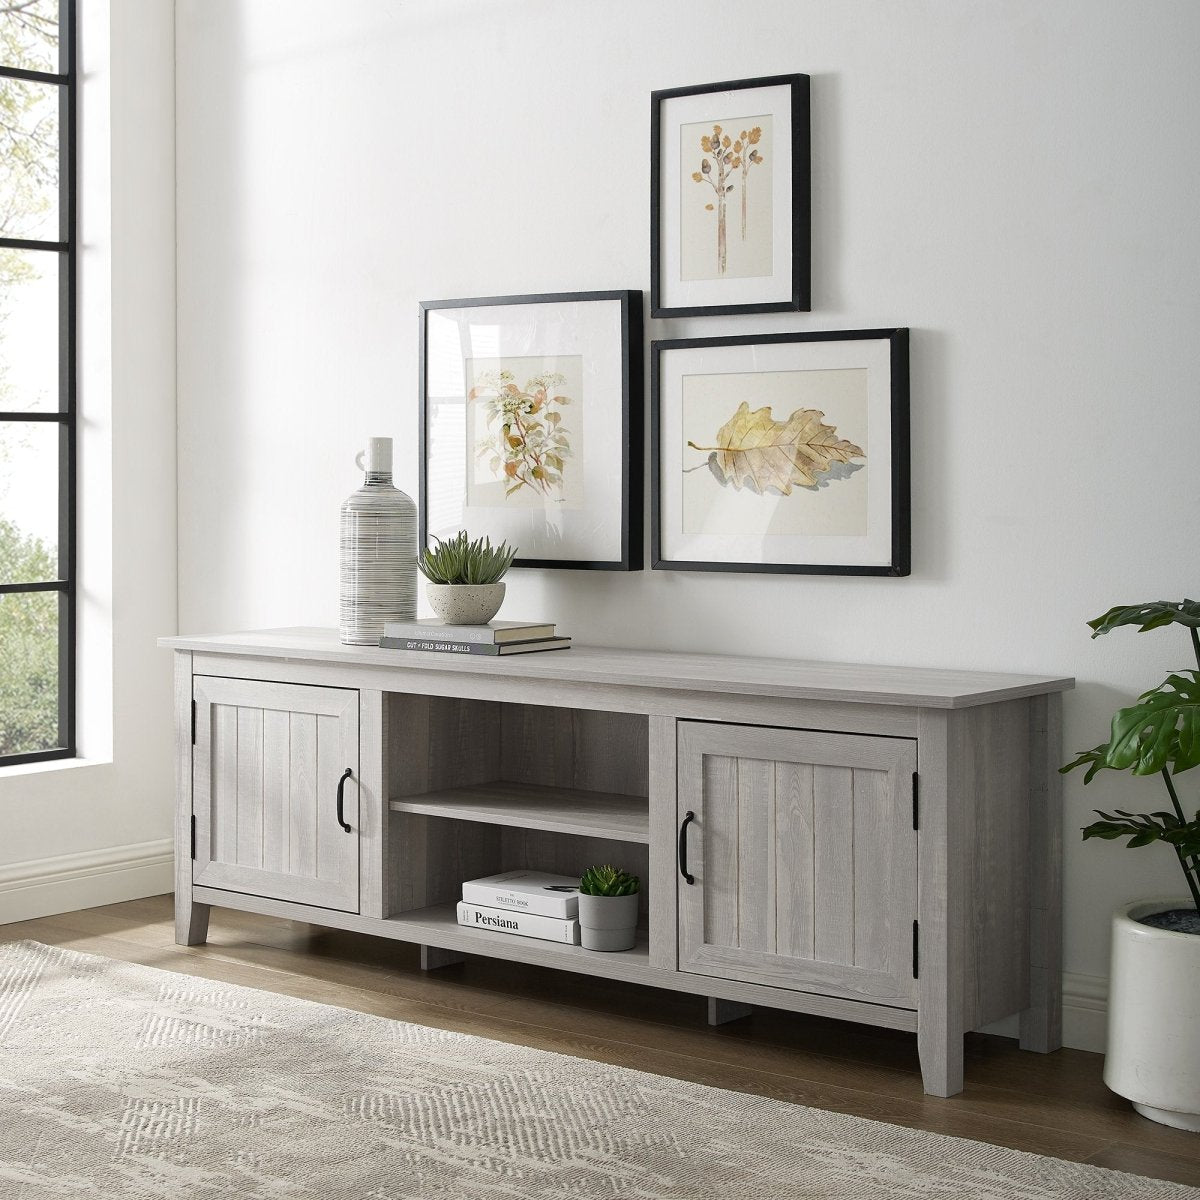 Walker Edison Simple Groove Door Console - lily & onyx